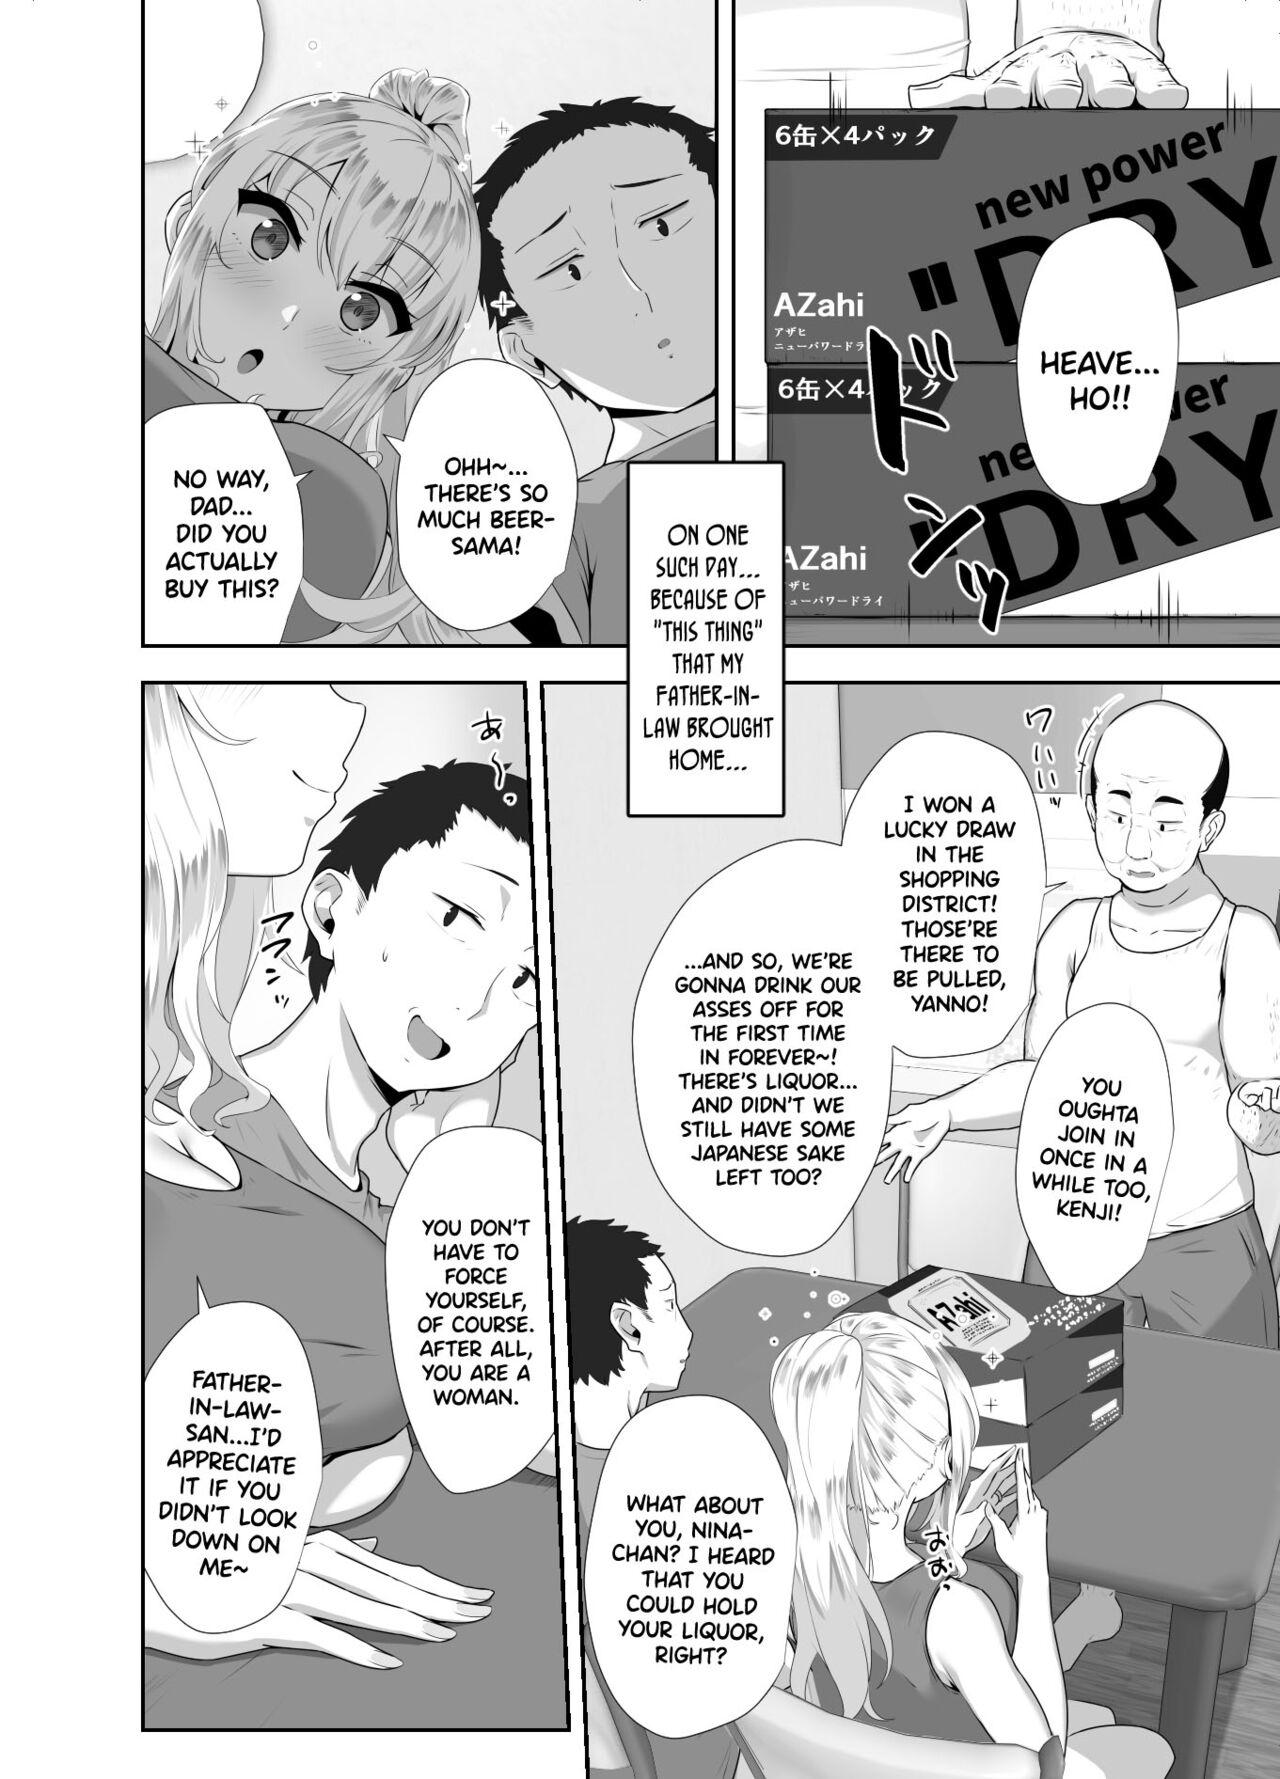 Play Russia-jin ga Osake de Nihonjin ni Makeru Wakenai Deshou? | There's No Way a Russian Could Lose to a Japanese Person In Drinking, Right? - Original Shaved Pussy - Page 5